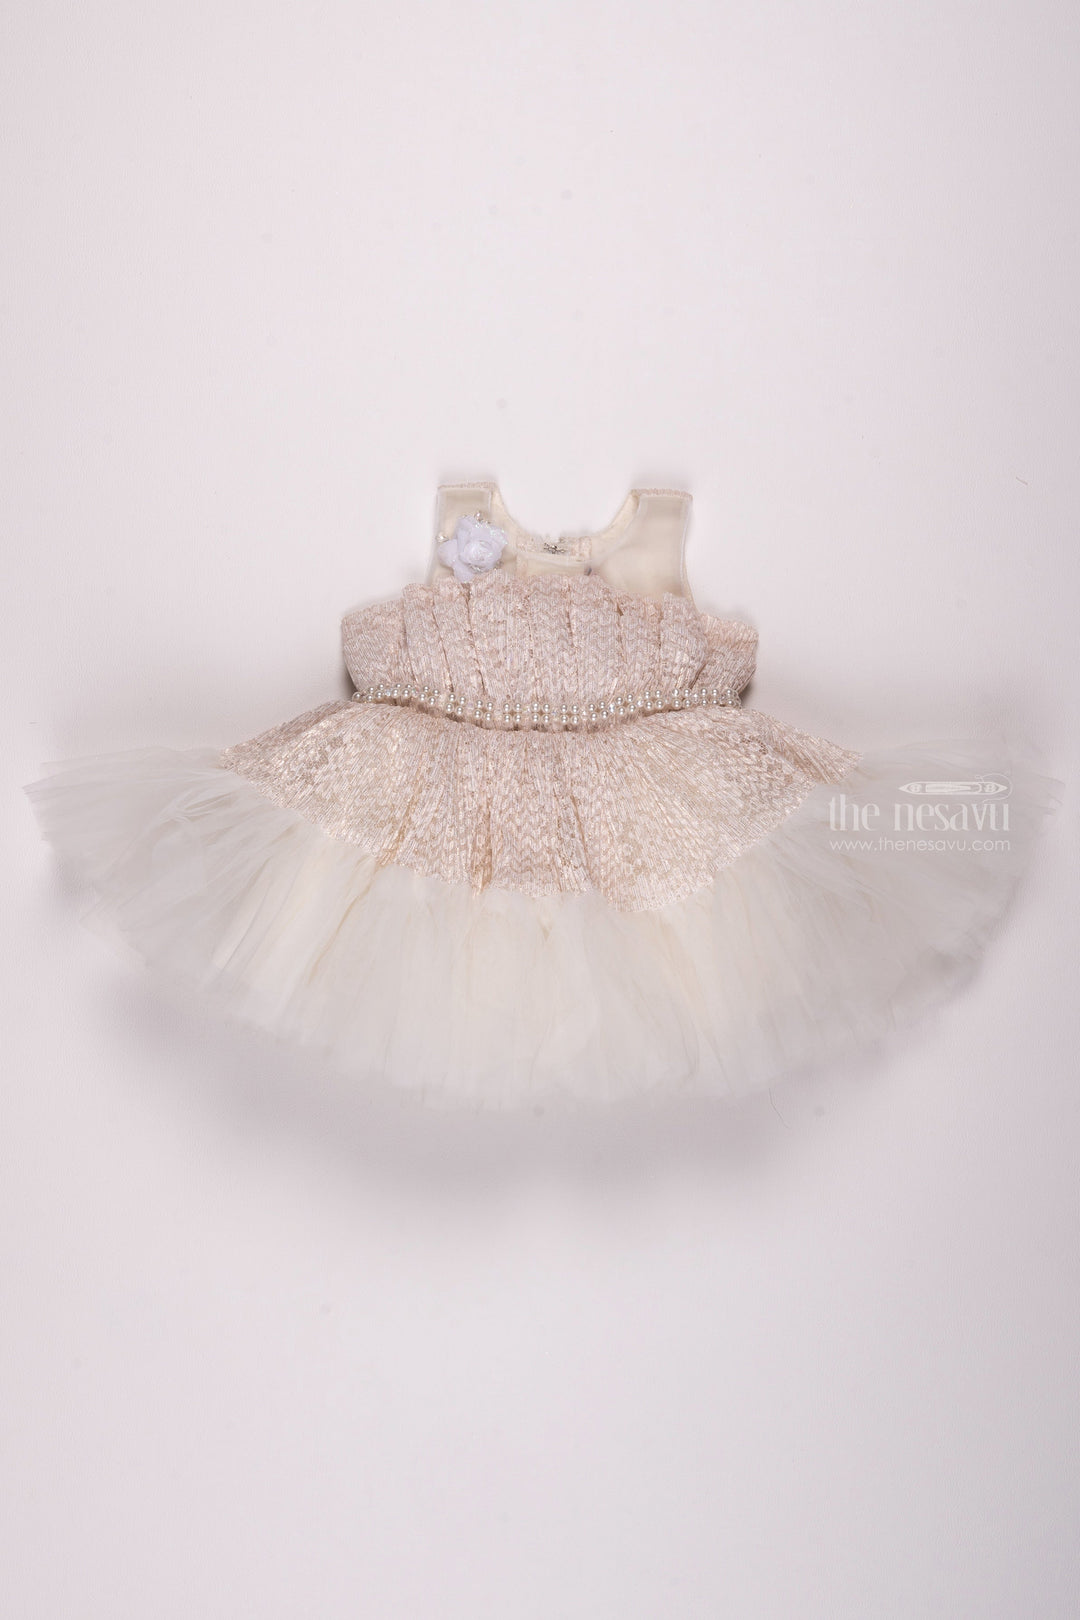 The Nesavu Girls Fancy Party Frock Ivory Elegance: Exquisite Floral Designer Russle Net Frock Adorned with Pearls Nesavu 16 (1Y) / Half white / Net PF149B-16 Fancy Dress for 3-Year-Old Birthday Girls | Elegant Party Frocks & Gowns | The Nesavu